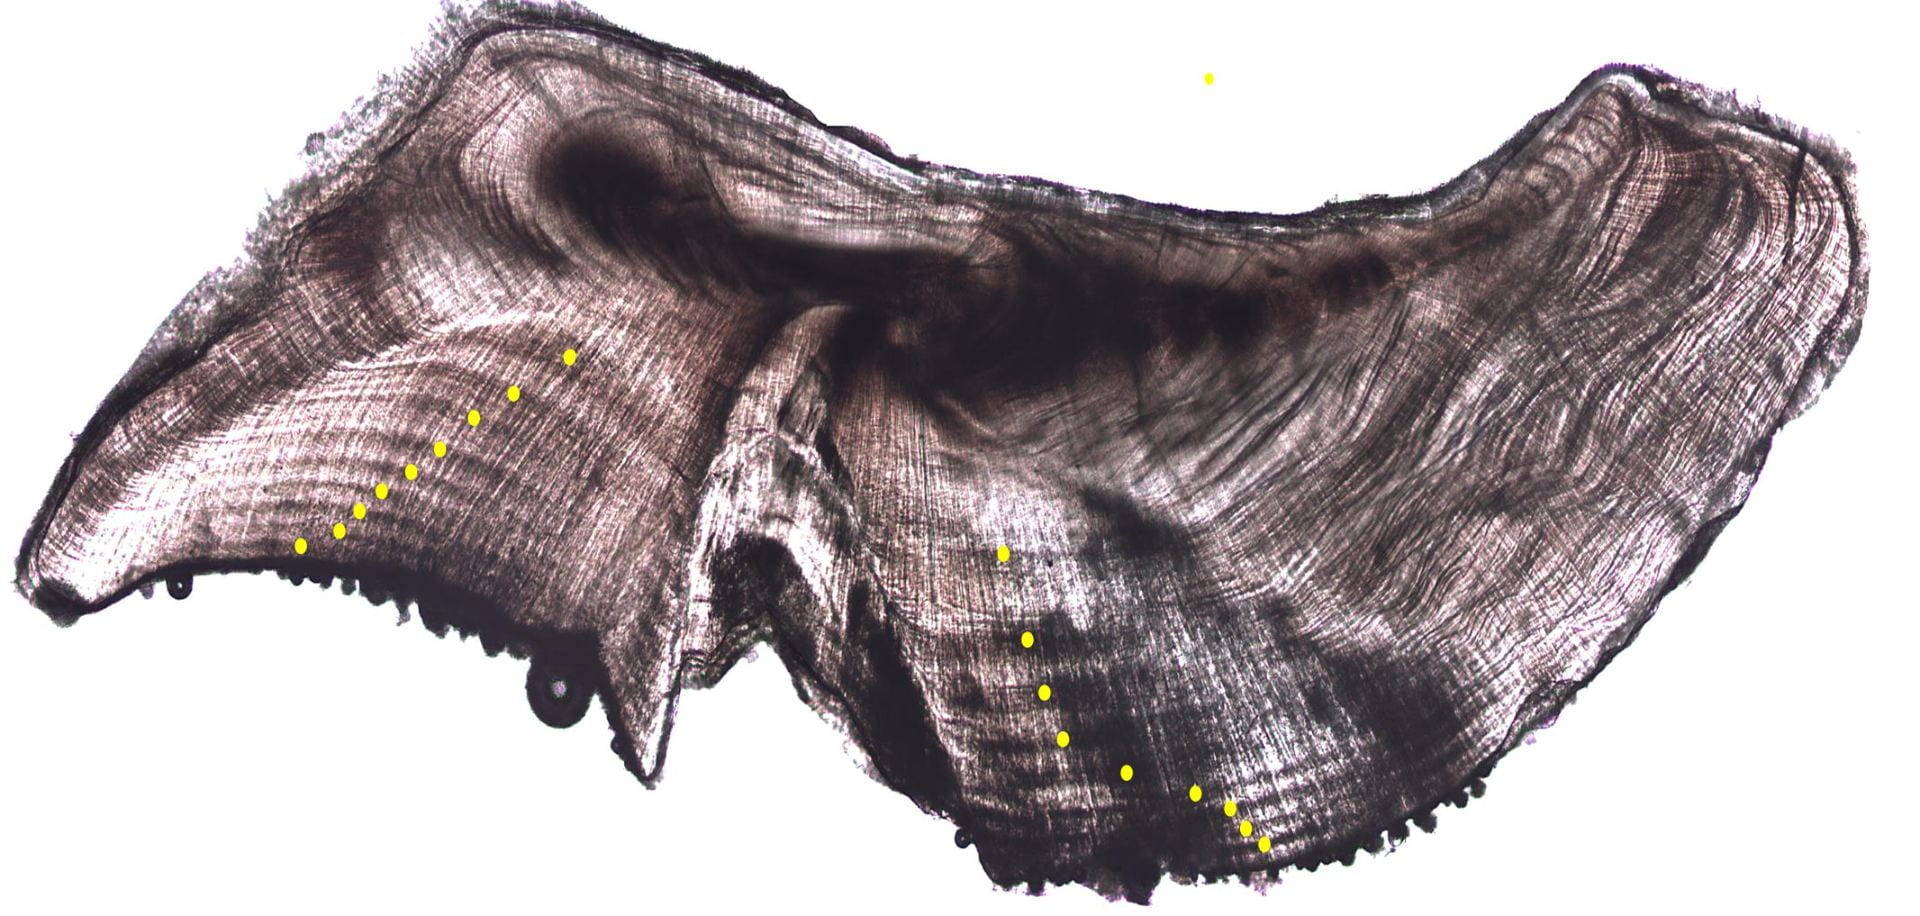 Cross section of a kahawai otolith (ear bone) - an irregularly shaped grey structure with concentric lines indicating growth like tree rings. Yellow dots mark each line.